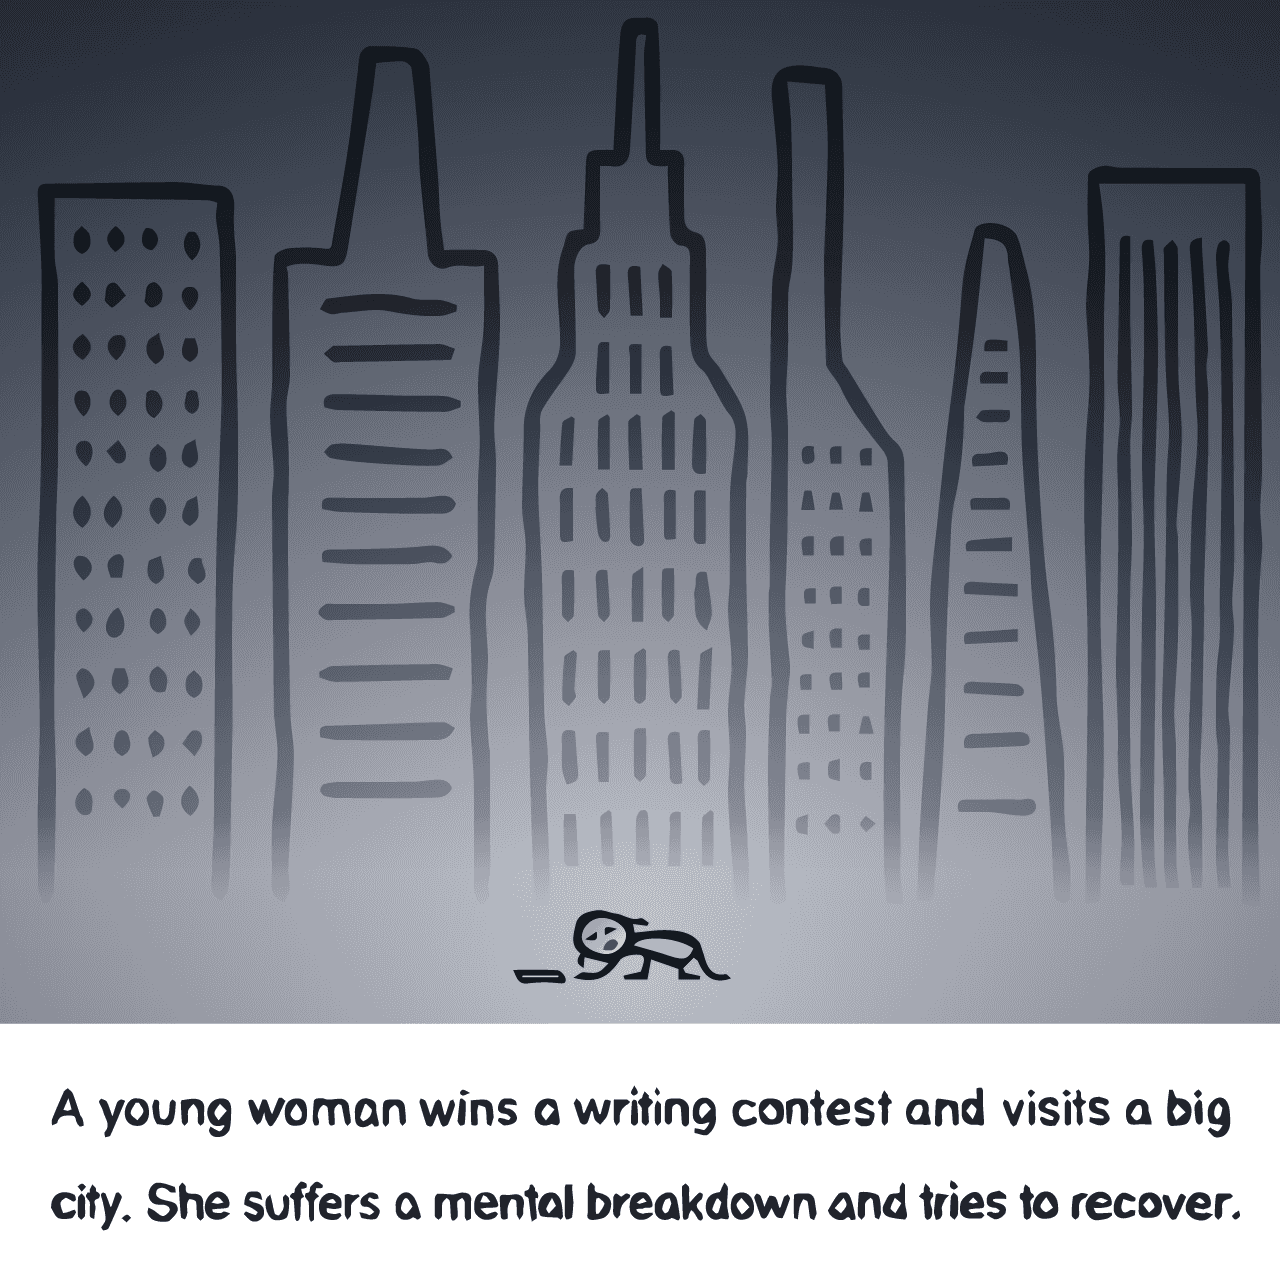 Sylvia Plath "The Bell Jar : A young woman wins a writing contest and visits a big city. She suffers a mental breakdown and tries to recover."